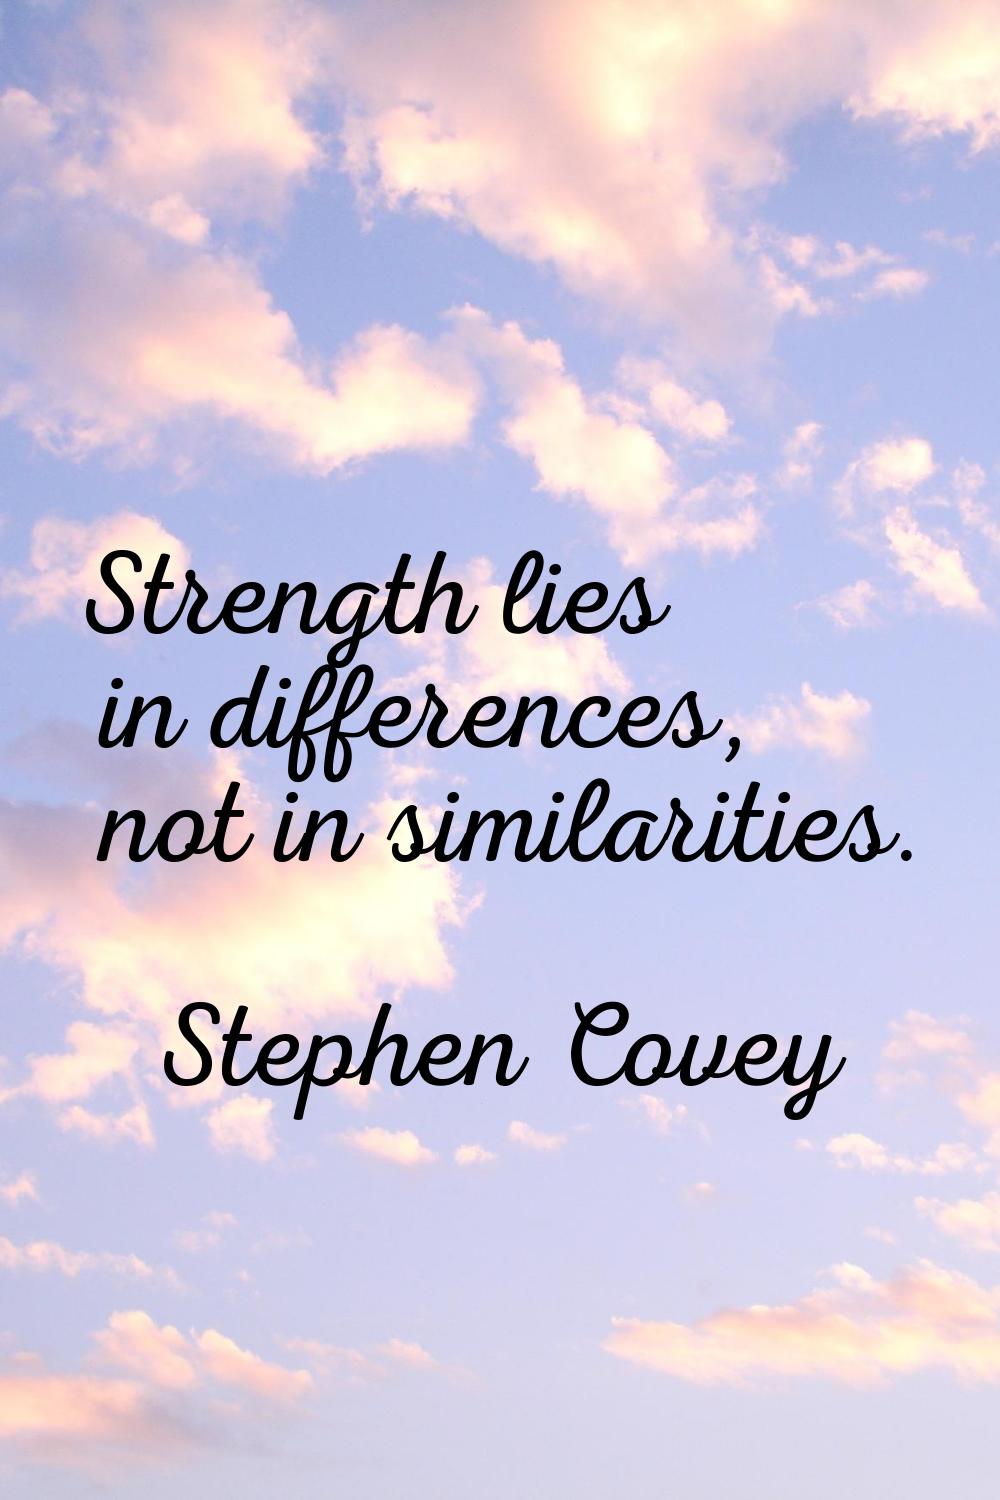 Strength lies in differences, not in similarities.